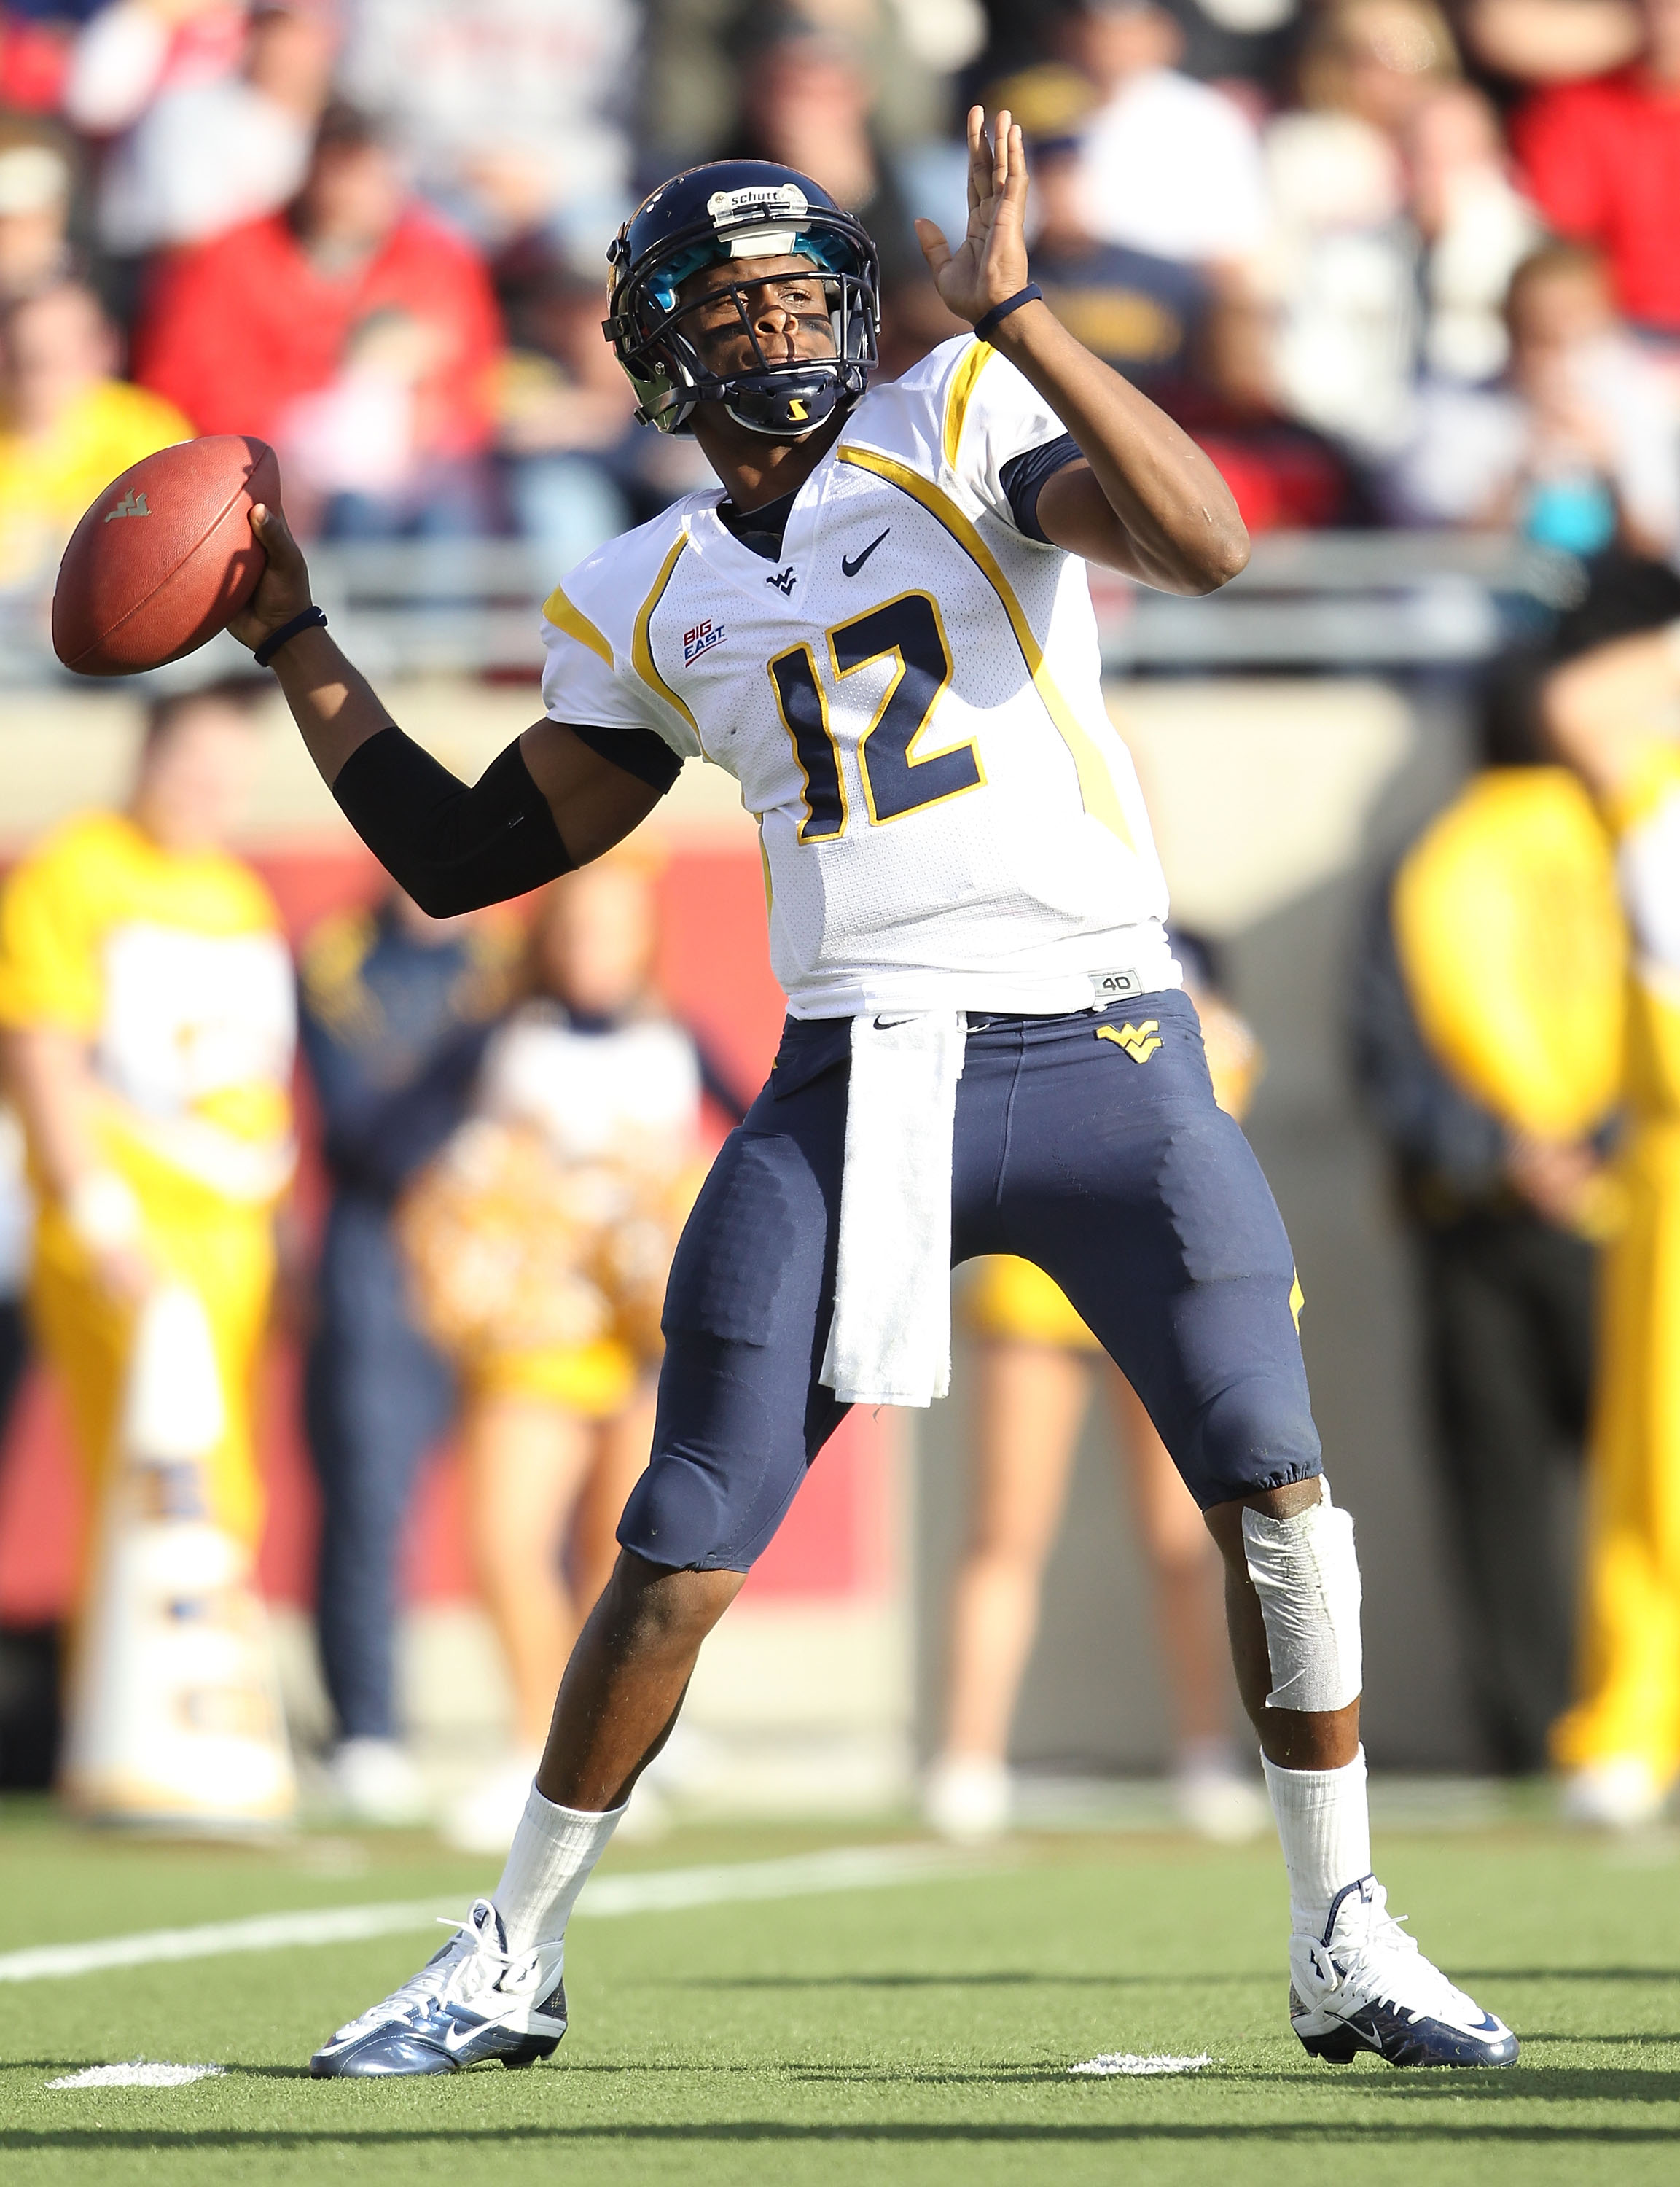 LOUISVILLE, KY - NOVEMBER 20: Geno Smith#12 of the West Virginia Mountaineers throws a pass during the Big East Conference game against the Louisville Cardinals at Papa John's Cardinal Stadium on November 20, 2010 in Louisville, Kentucky.  (Photo by Andy